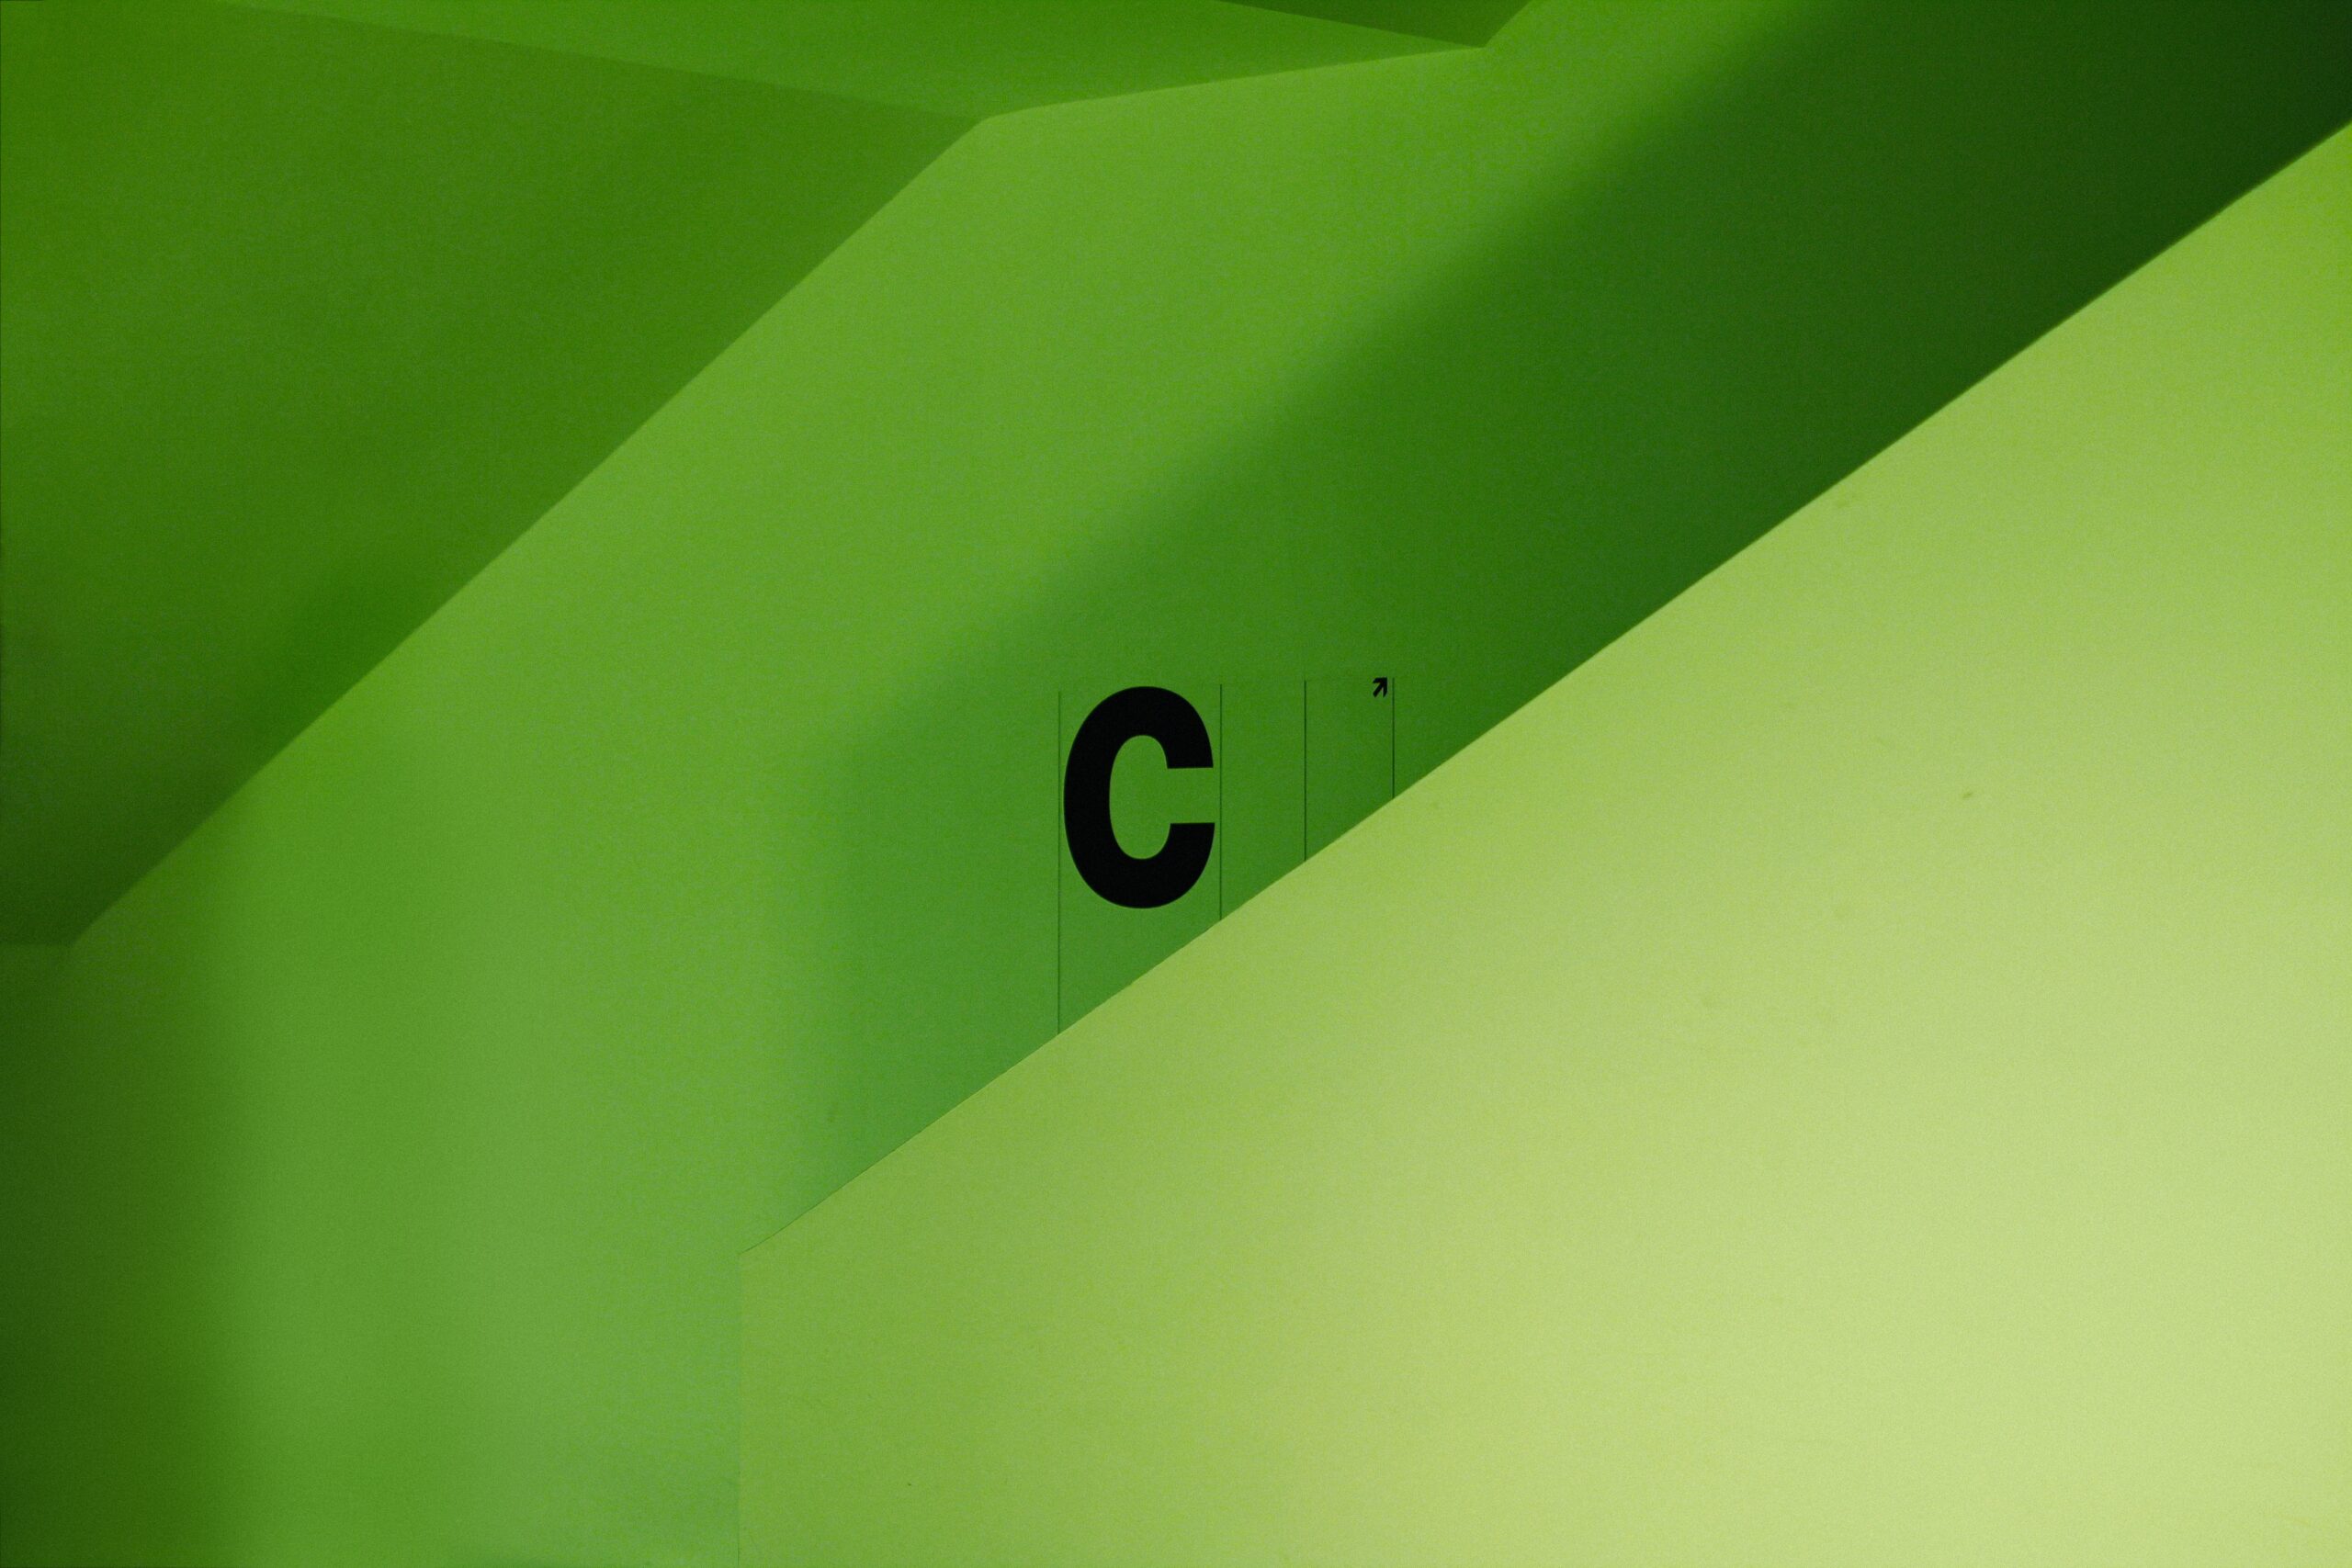 Hire C Sharp developers | Picture of the letter C in the center of the image, with multiple shades of green surrounding the letter in an angular pattern.